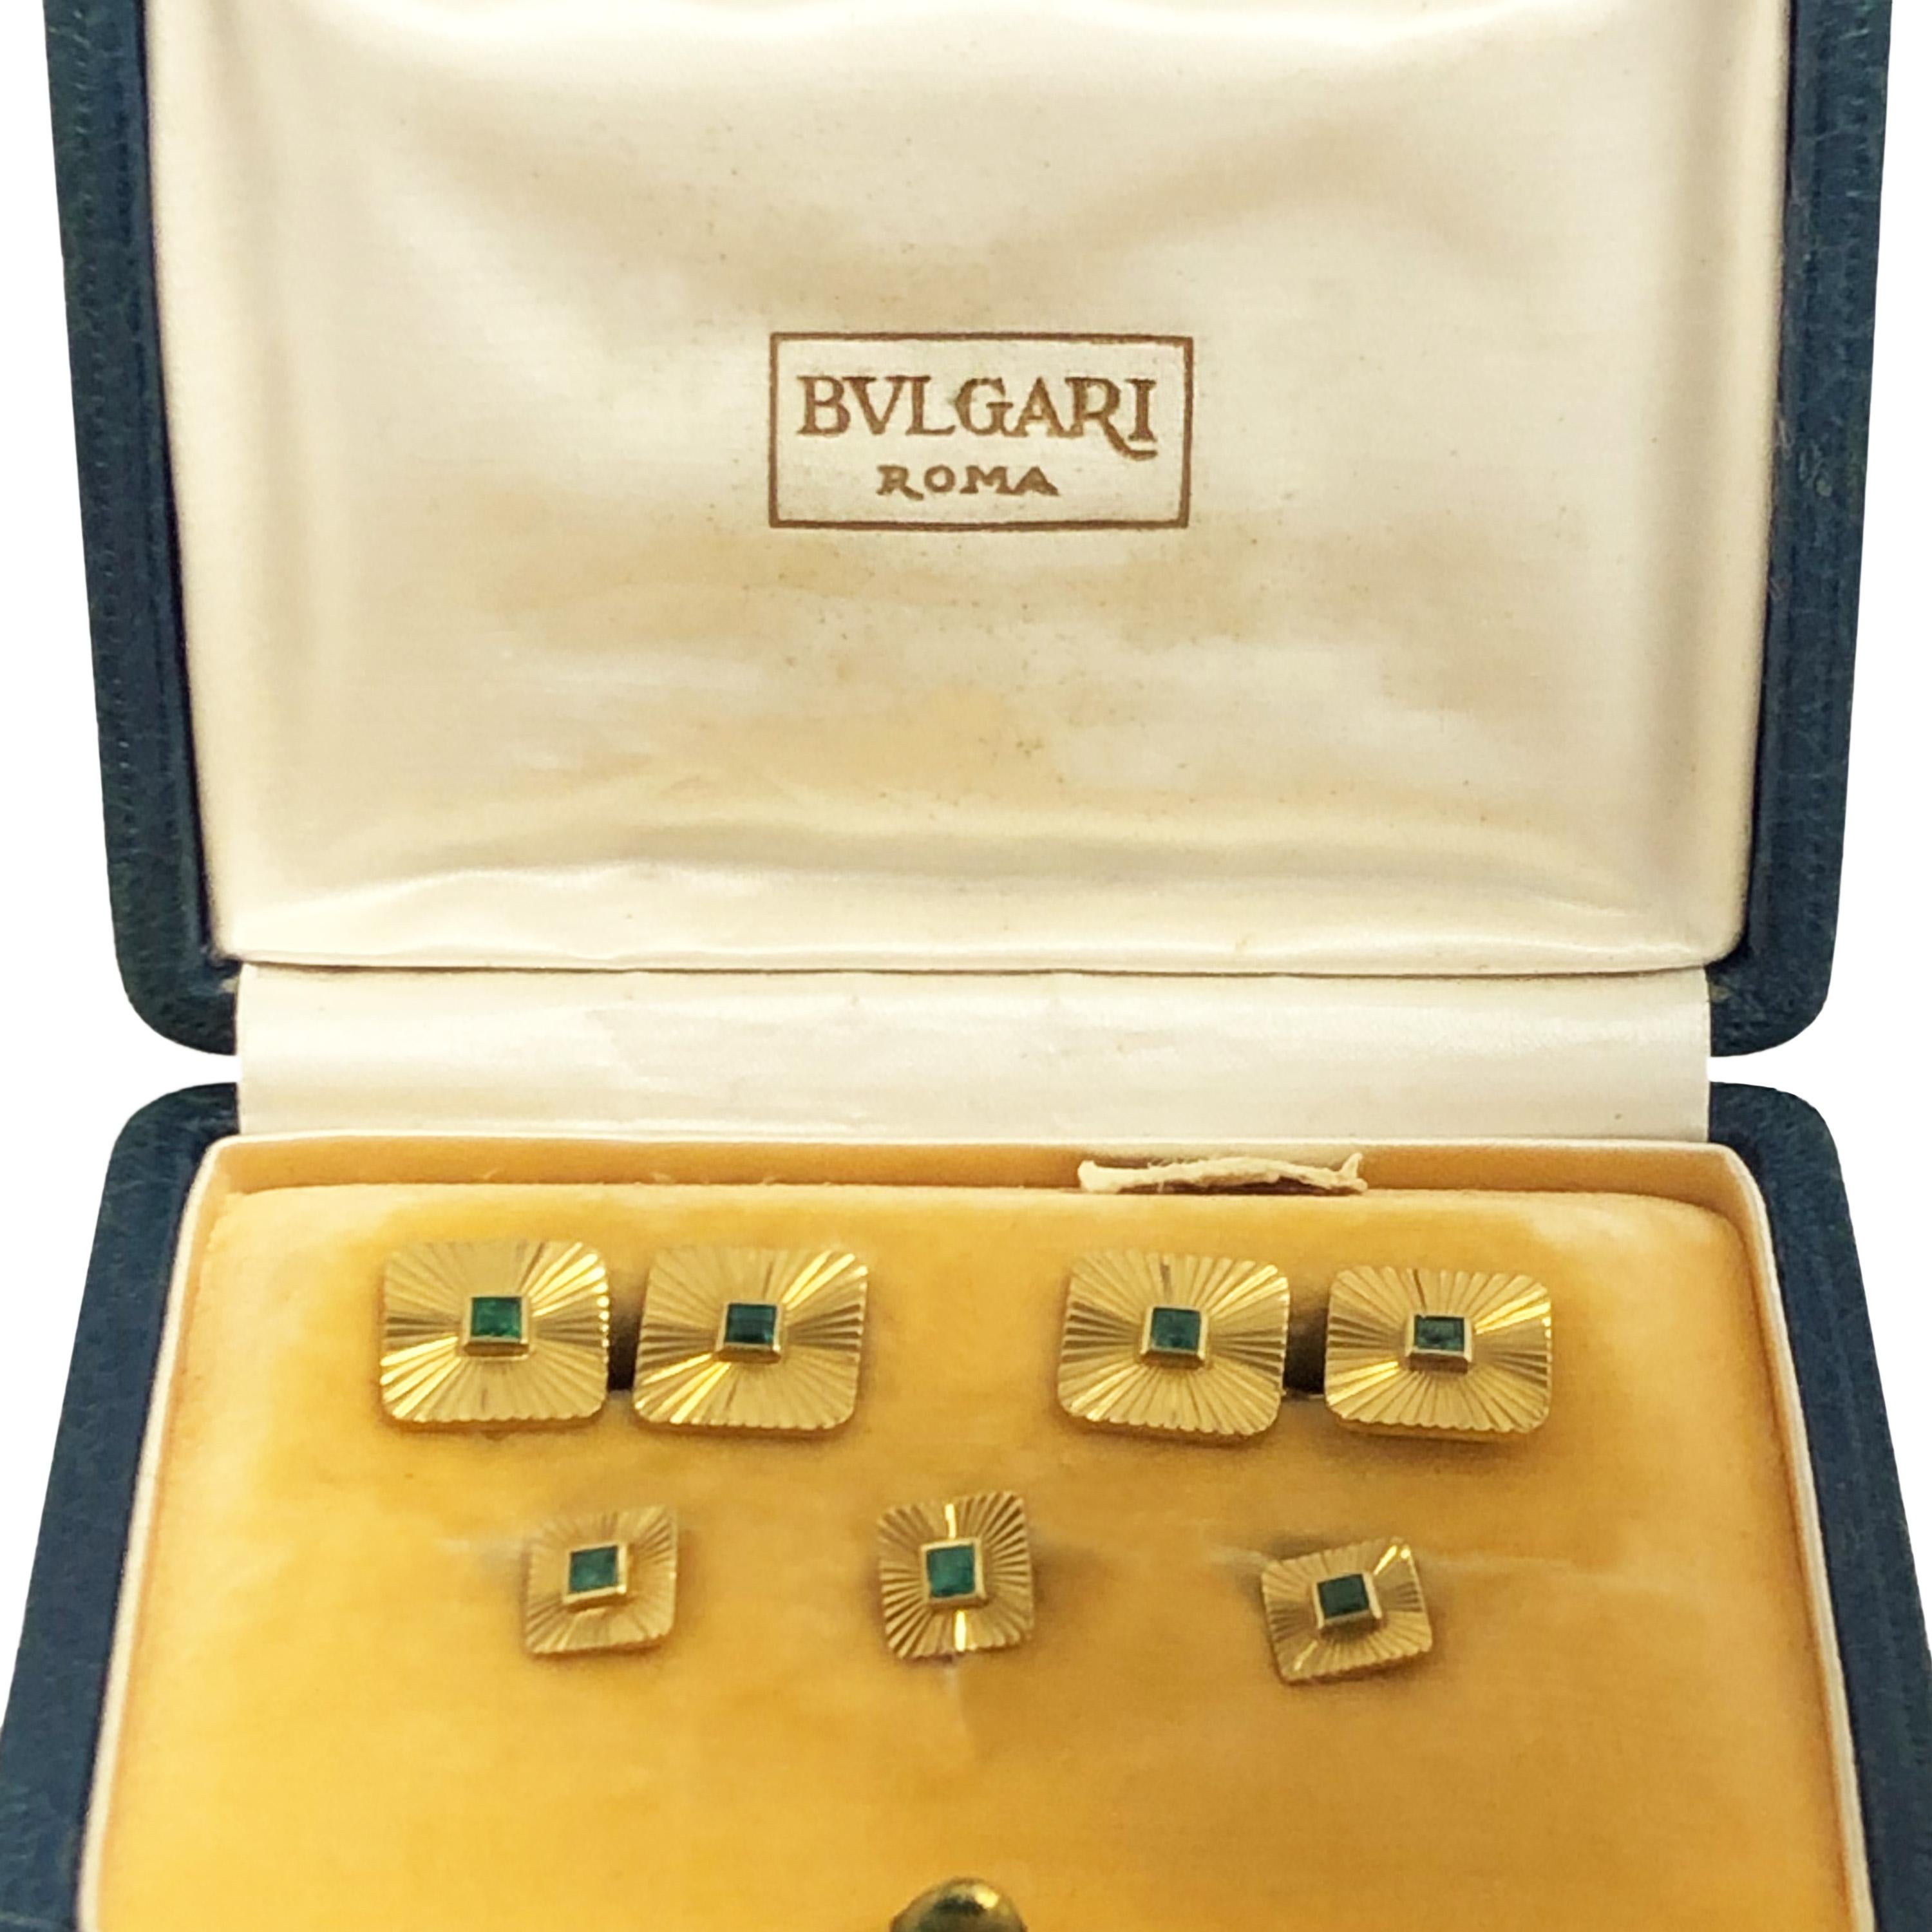 Circa 1950s Bulgari Tuxedo Cuff-link and Shirt Stud Dress set. 18K Yellow Gold cuff-links with a faceted cut design with the tops measuring 7/16 X 7/16 inch and set with Square step cut Emeralds of very fine color. 3 Shirt studs also set with